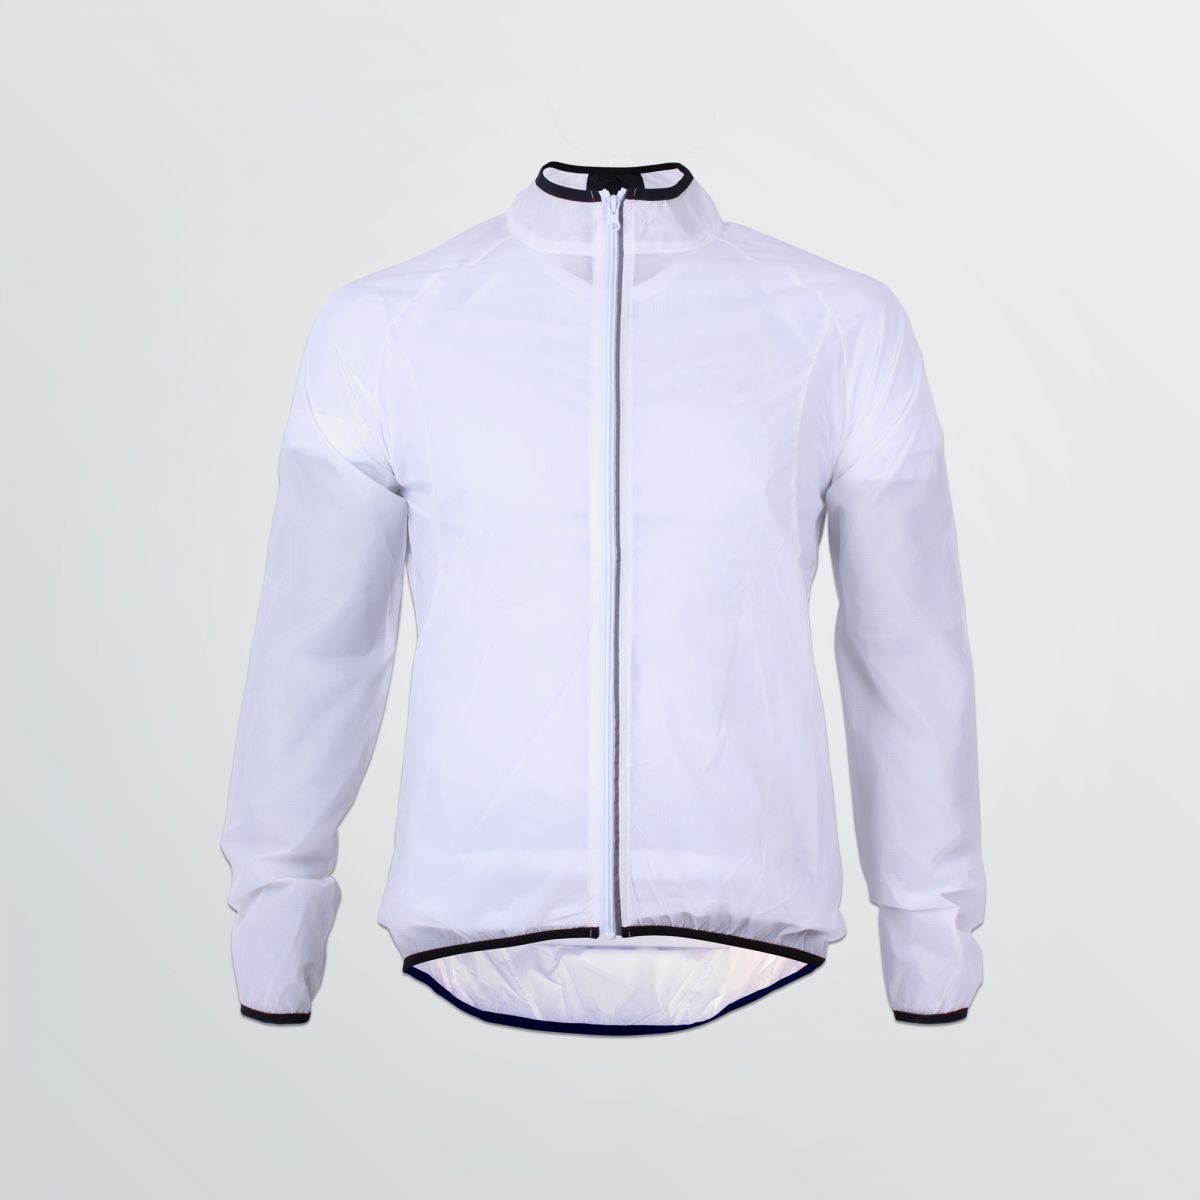 wind resistant Basic Wind Jacket for customisation in white colour with black coloured welt - front view